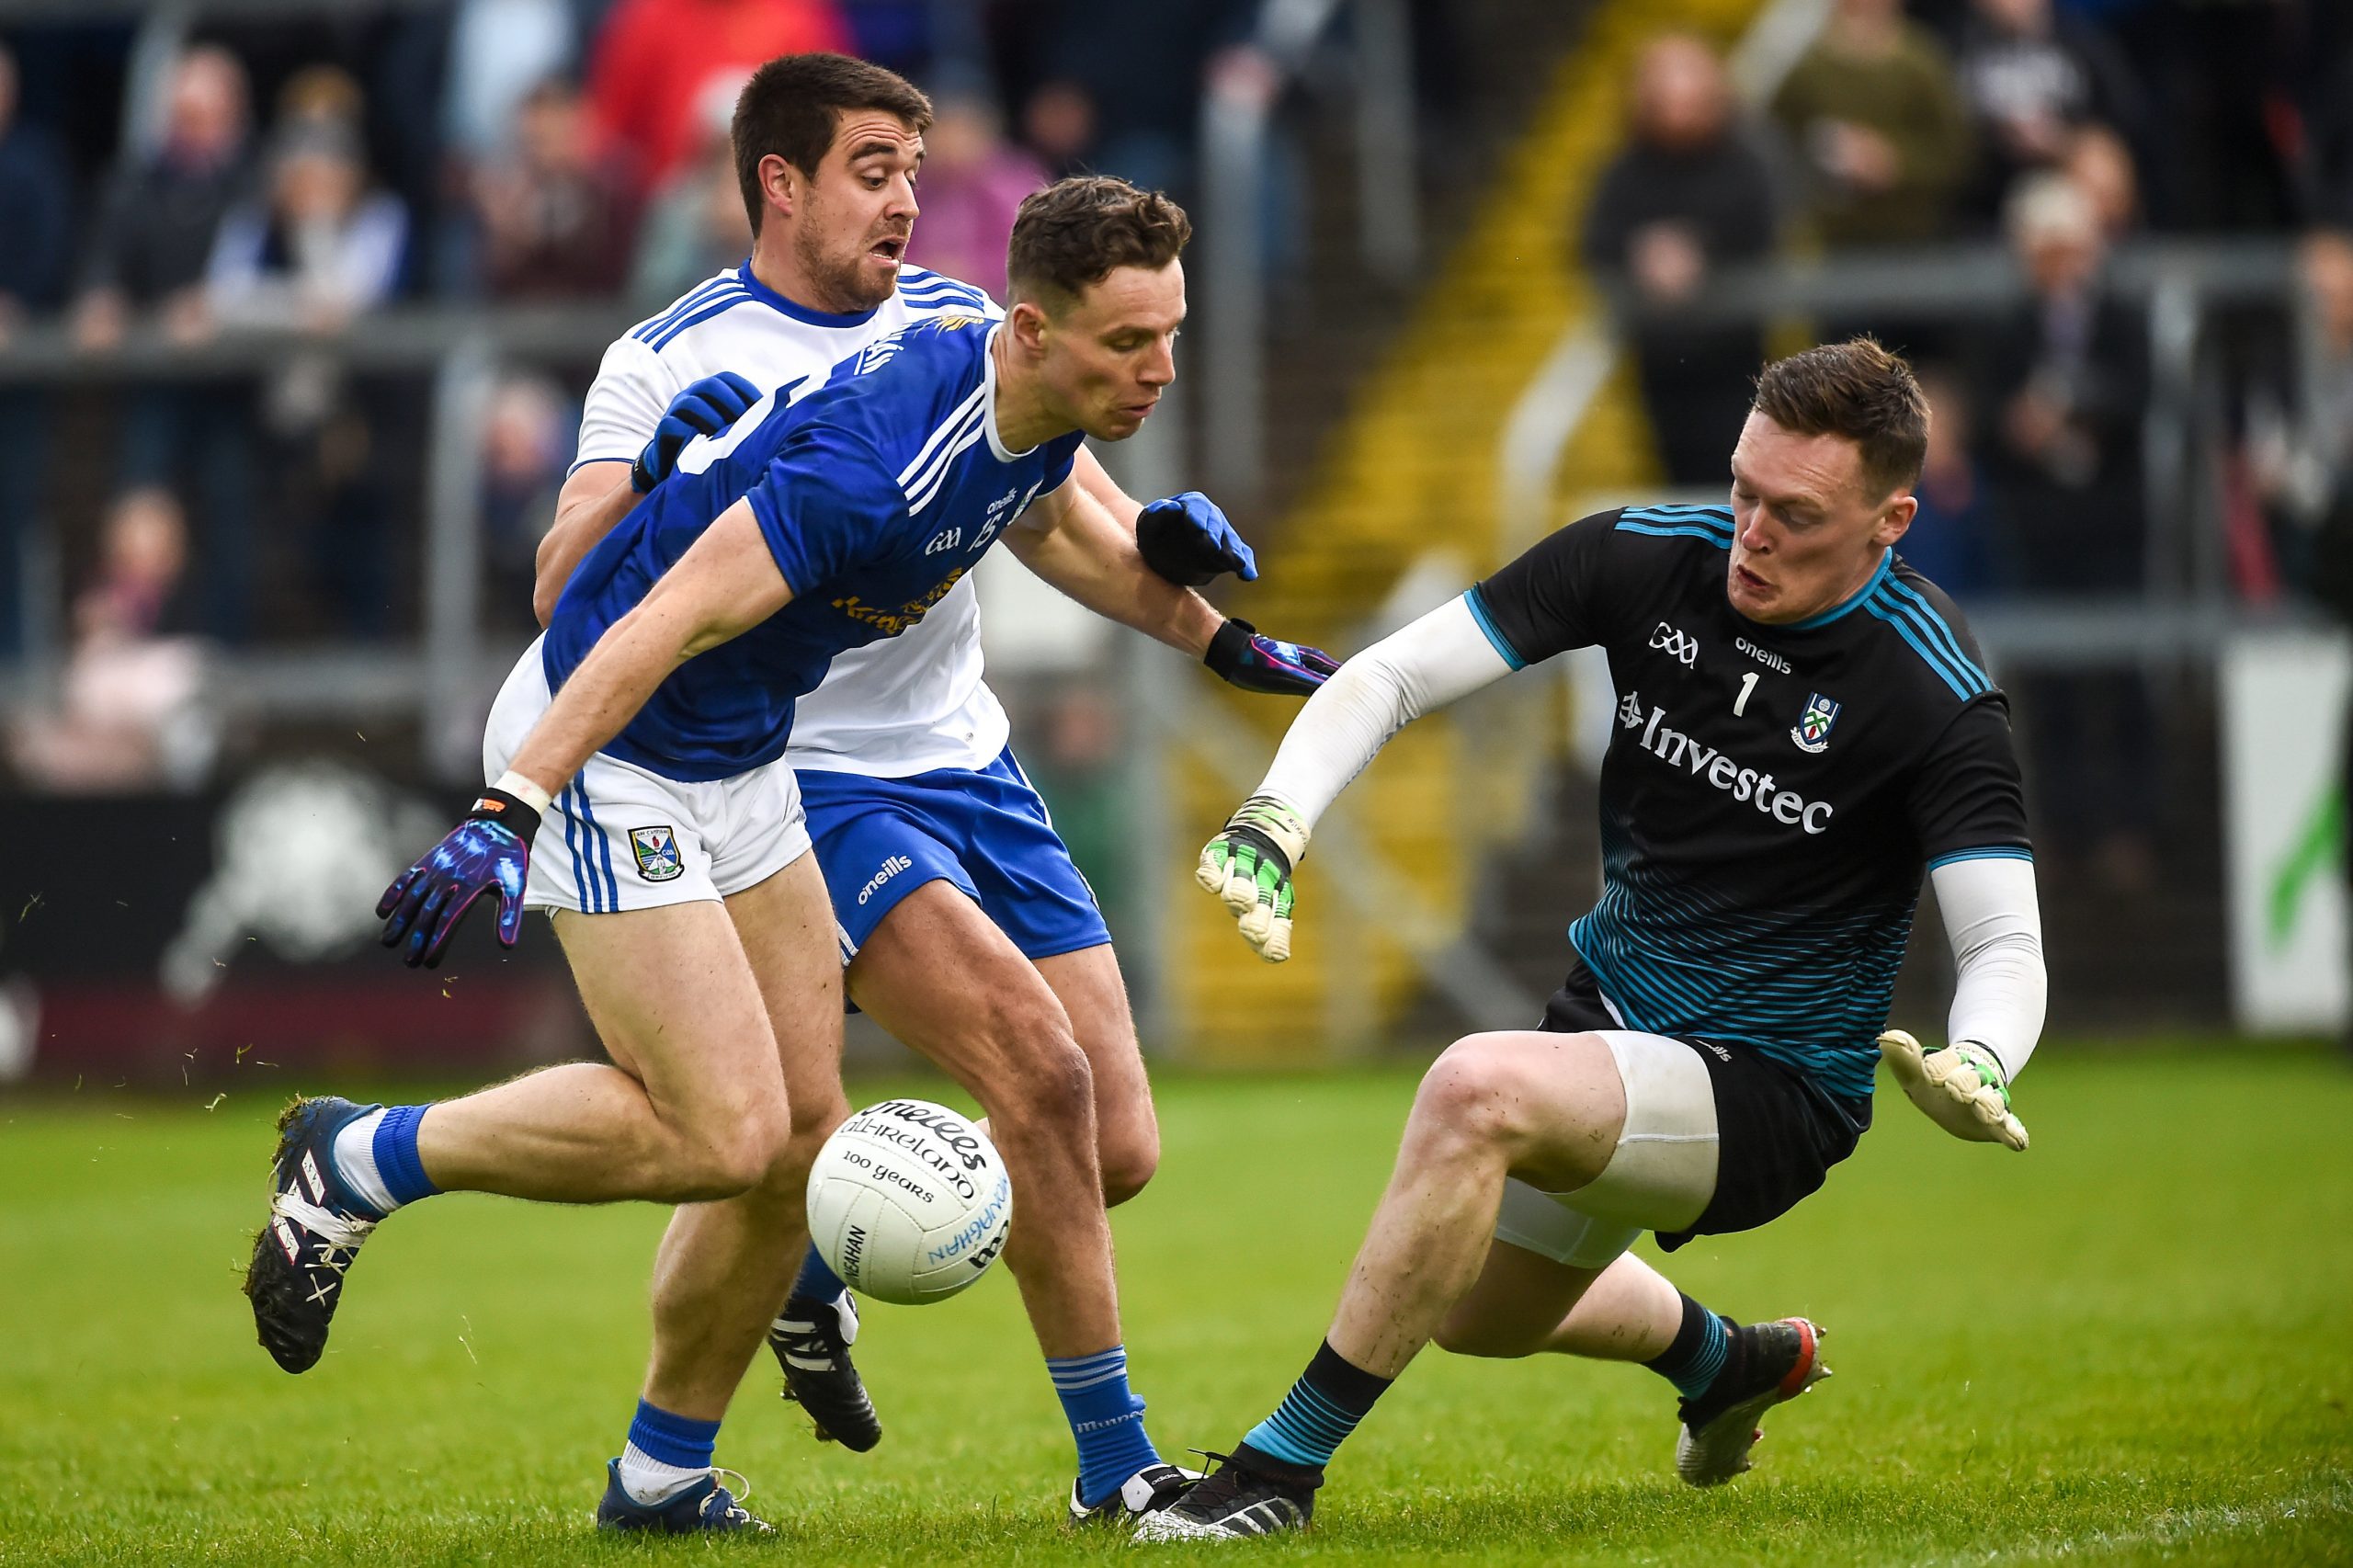 Cavan spring a surprise to advance to semi-final